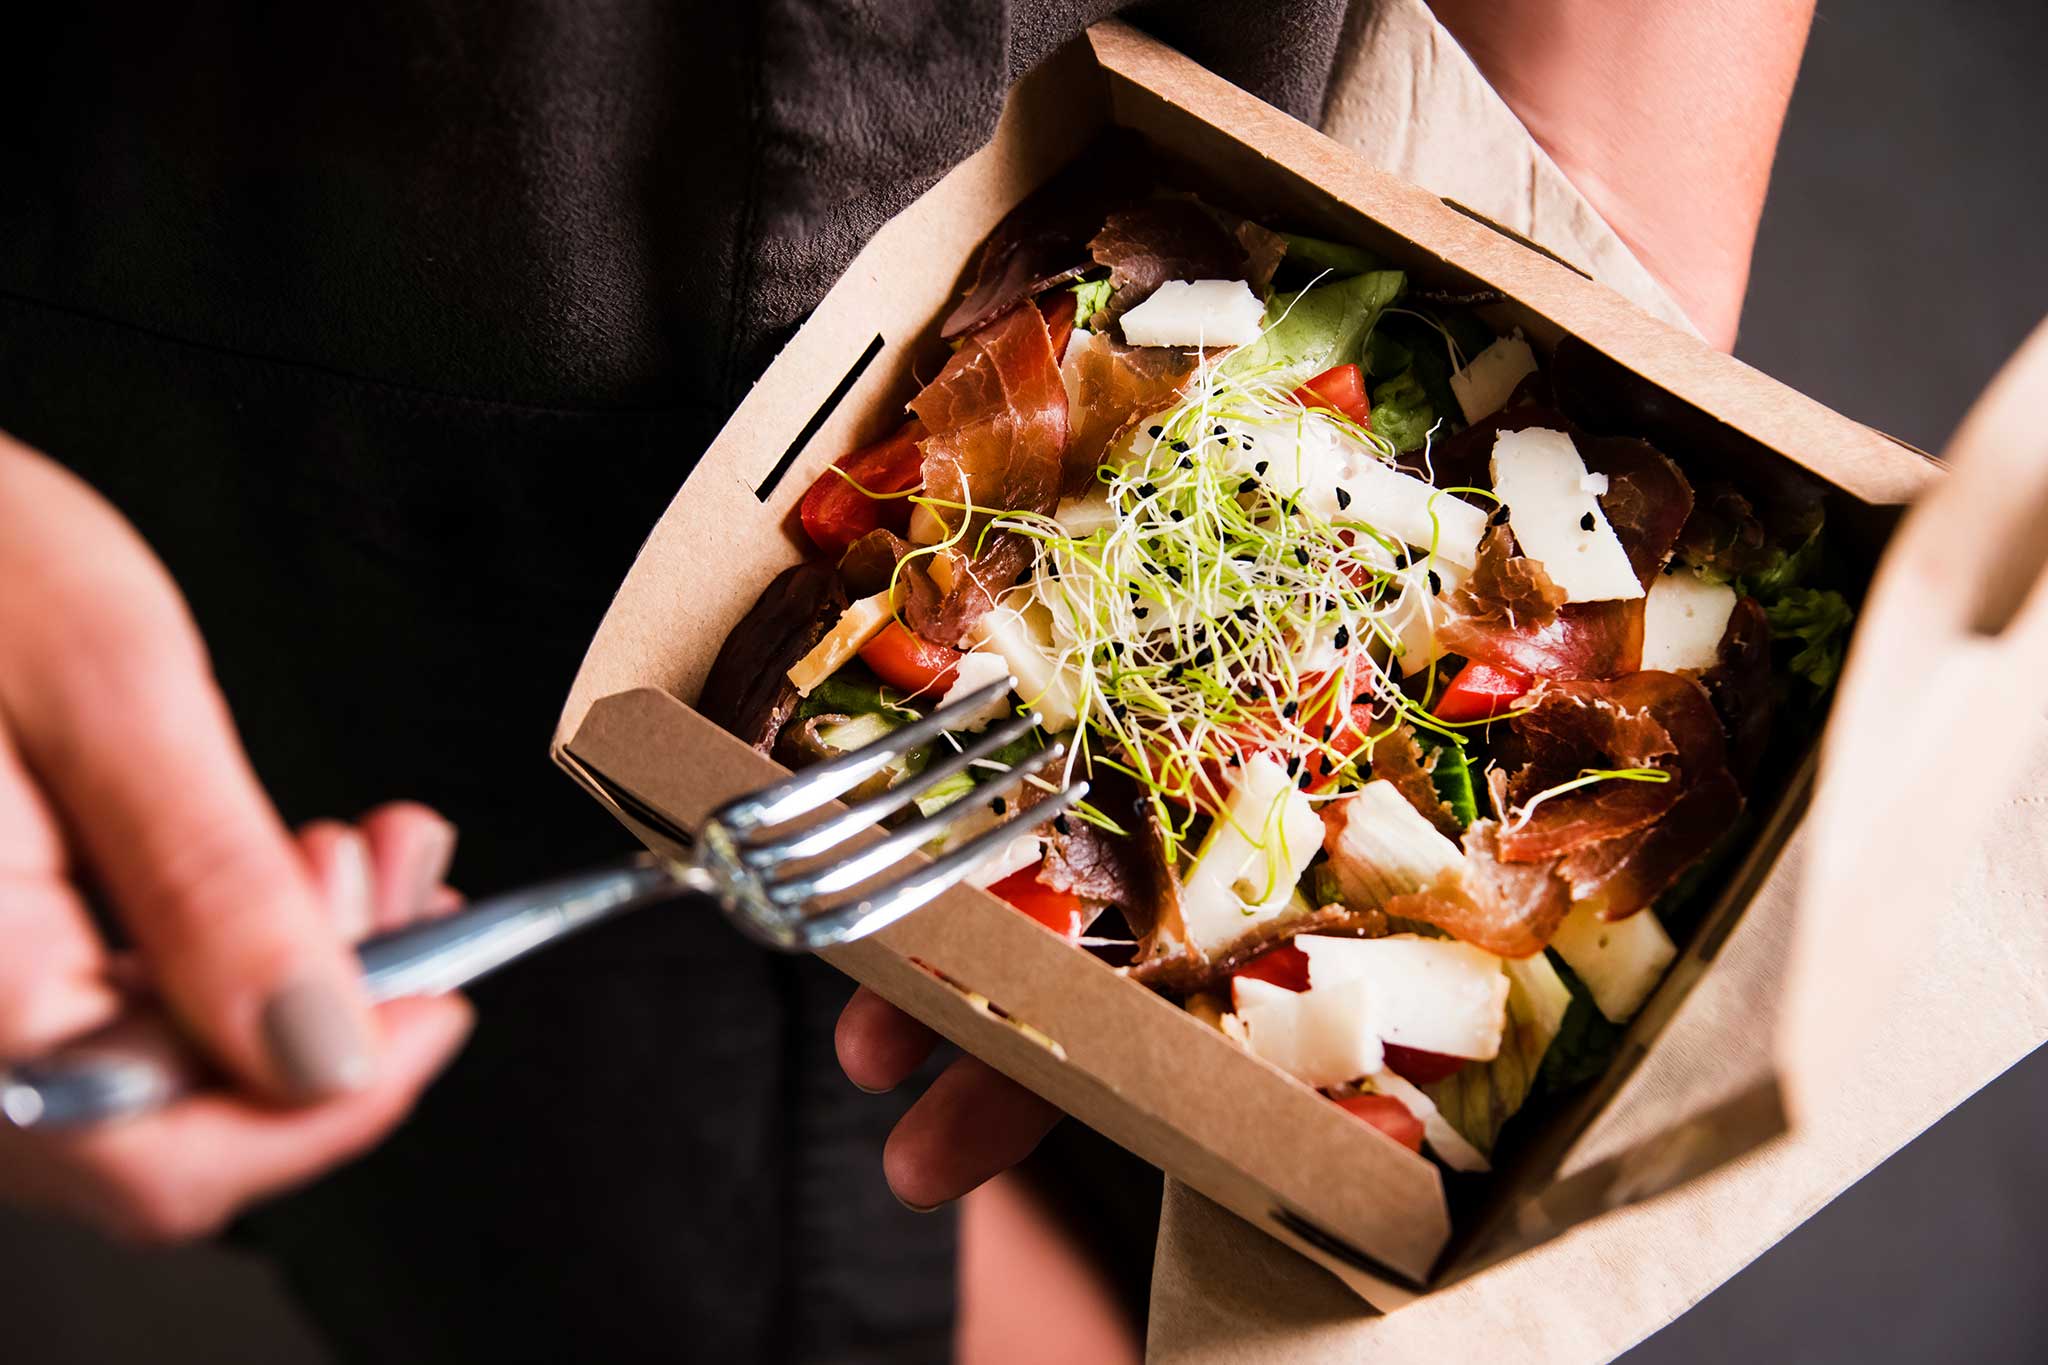 Eating from a compostable takeout lunch container